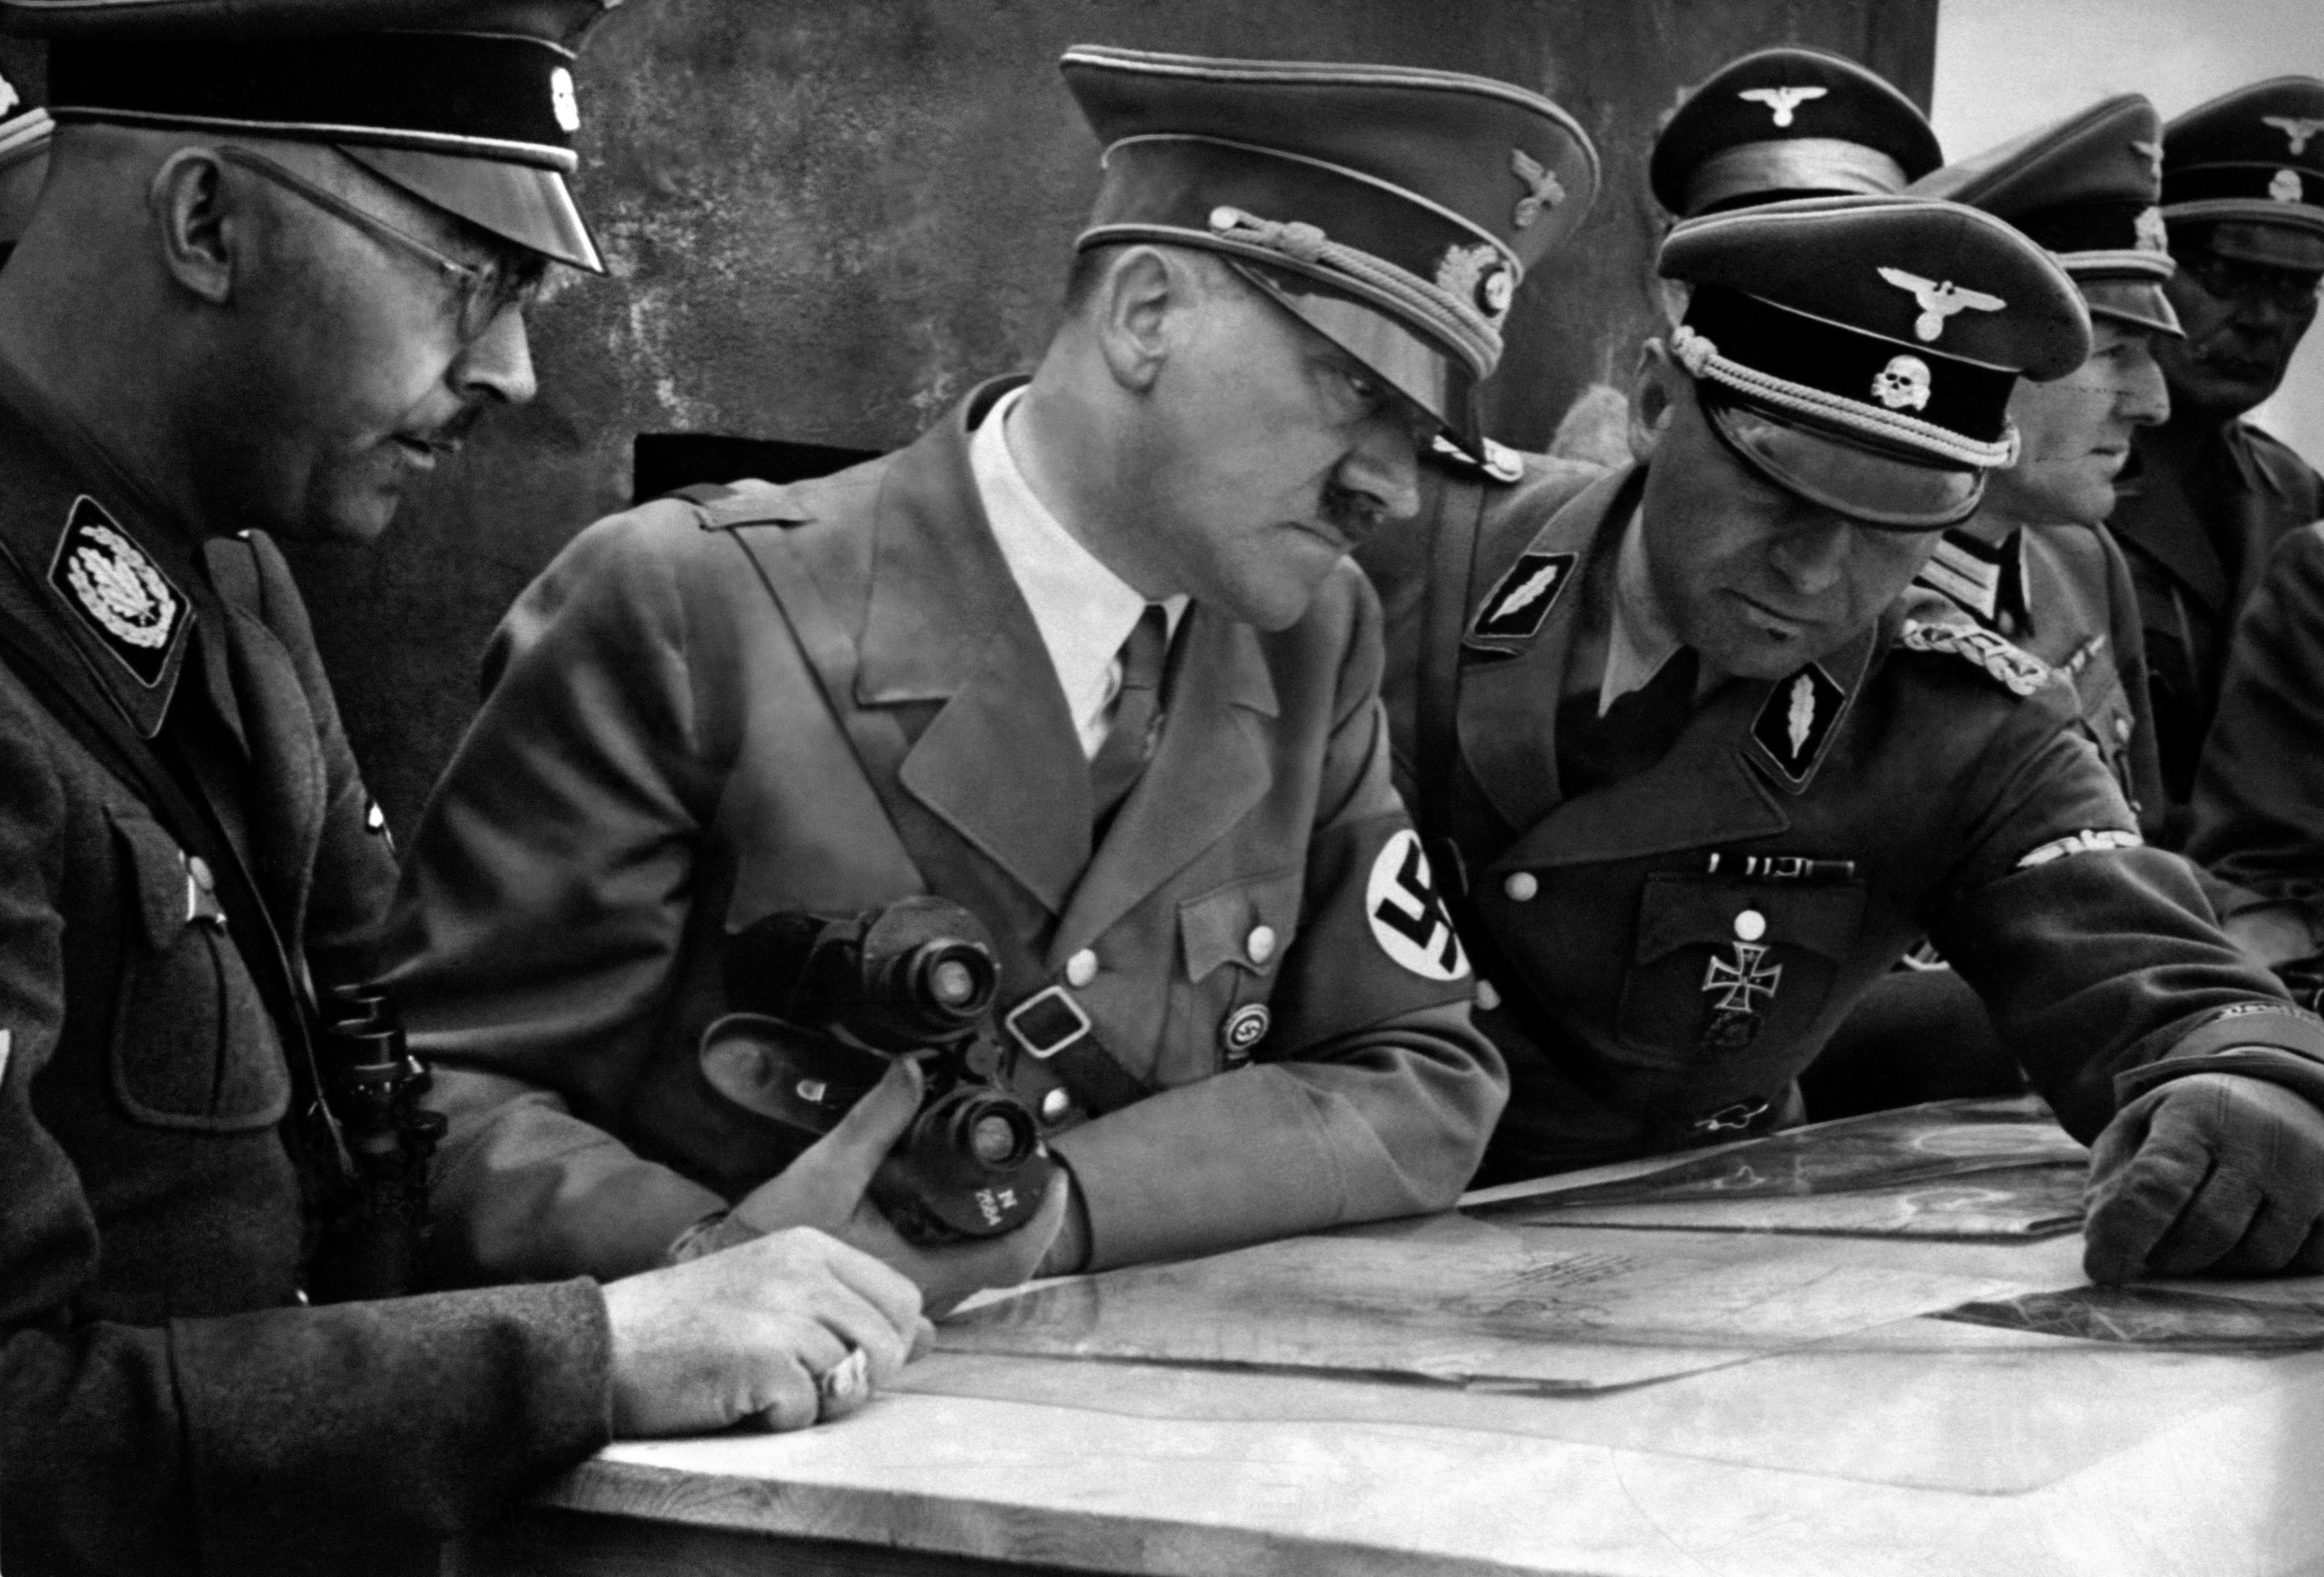 A picture dated 1939 shows German Nazi Chancellor and dictator Adolf Hitler (C) consulting a geographical survey map with his general staff including Heinrich Himmler (L) and Martin Bormann (R) at an unlocated place during World War II